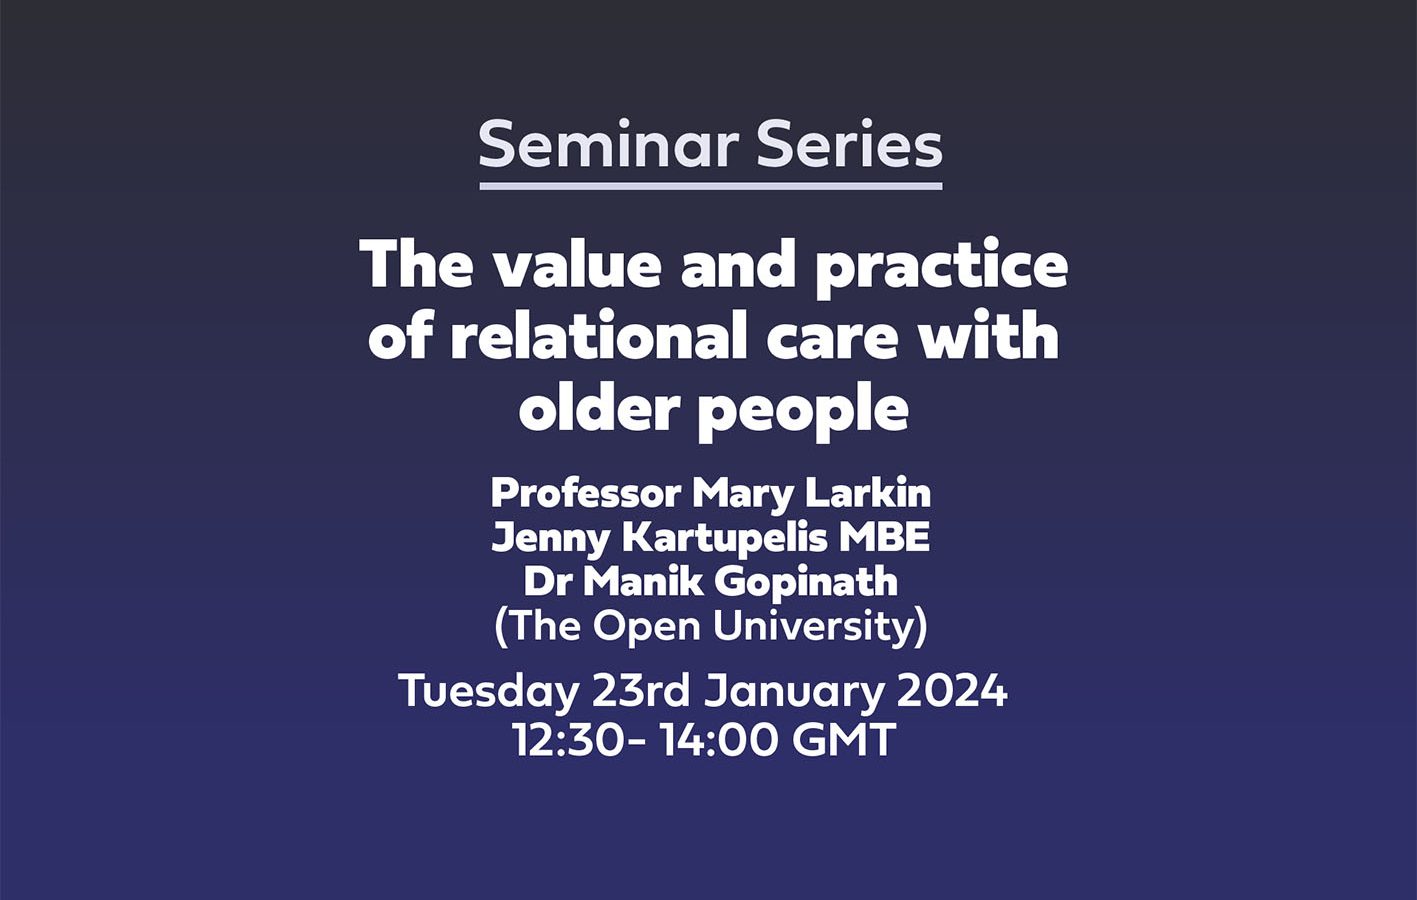 Seminar Series 'The value and practice of relational care with older people' Professor Mary Larkin Jenny Kartupelis MBE Dr Manik Gopinath (The Open University) Tuesday 23rd January 202412:30- 14:00 GMT